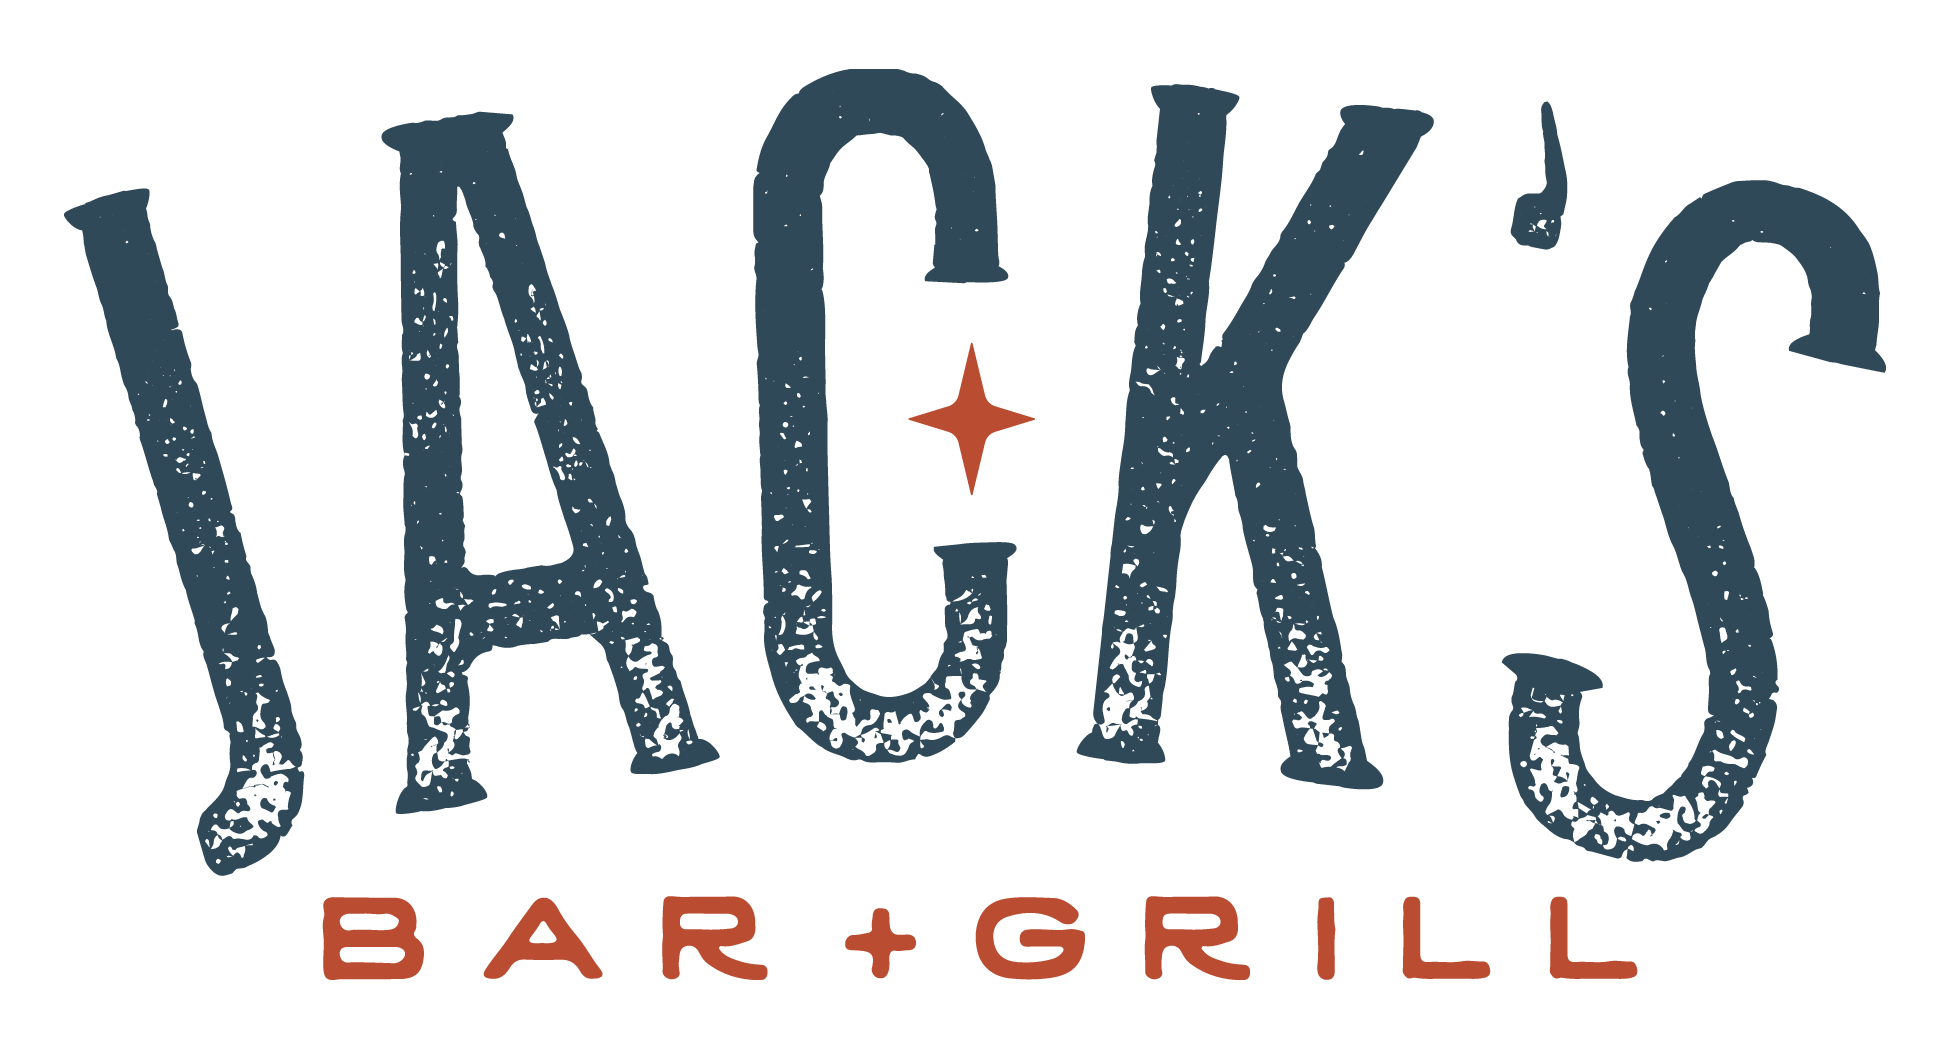 Jack's Bar + Grill- Places to eat in Philadelphia 